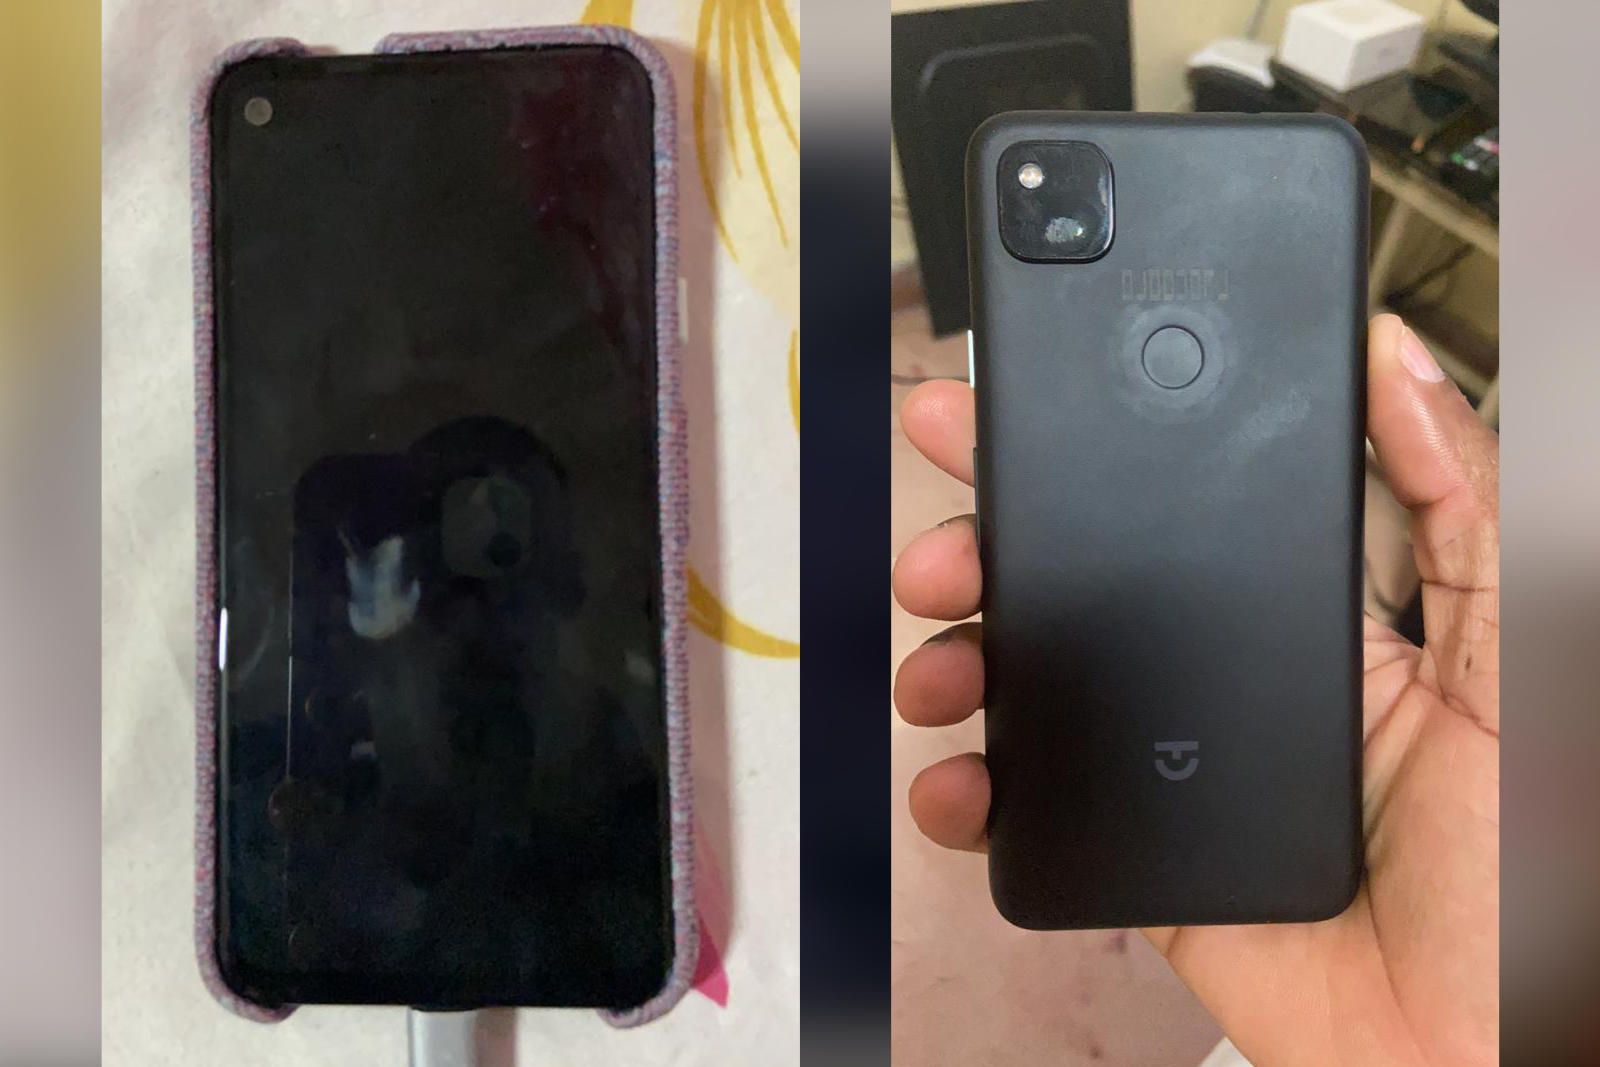 Google Pixel 4a shows up in some new leaked photos image 1